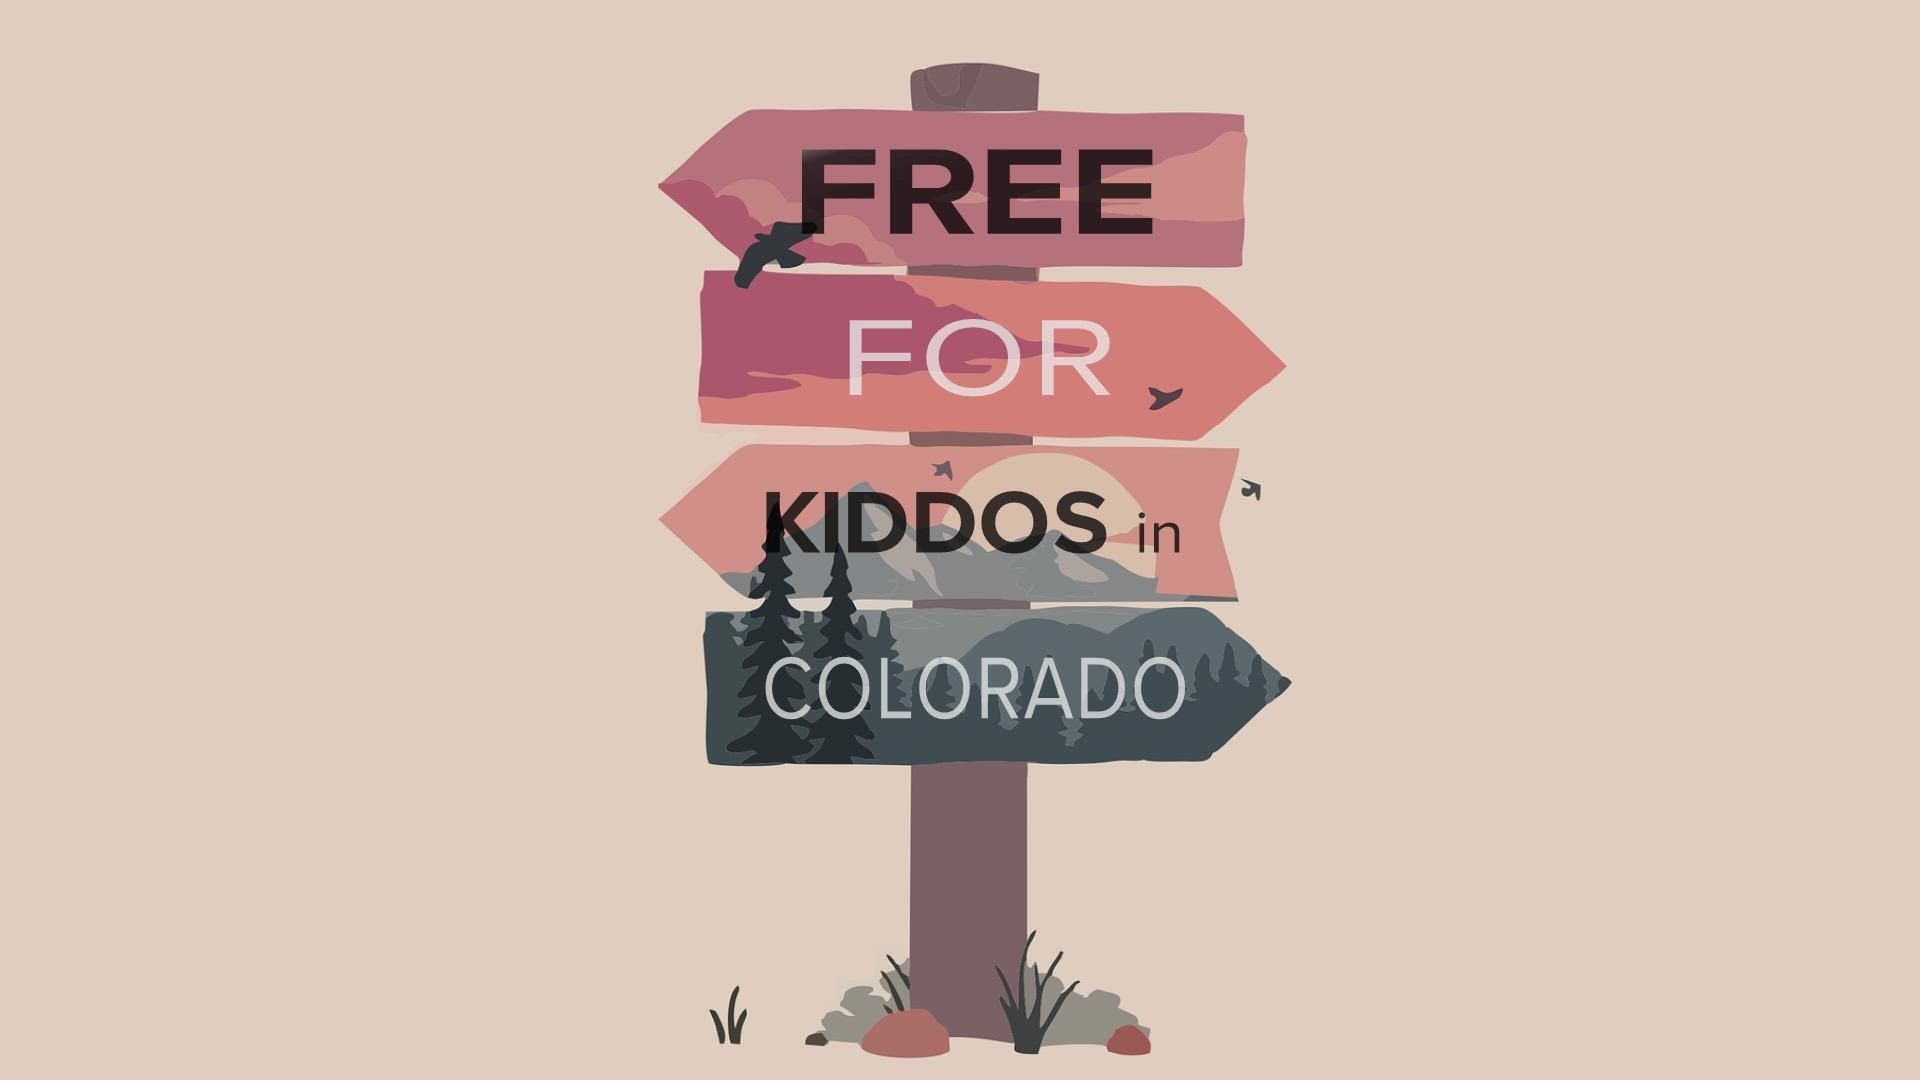 Here are some fun, free, family-friendly events in Colorado from Sept. 10-11, 2022.